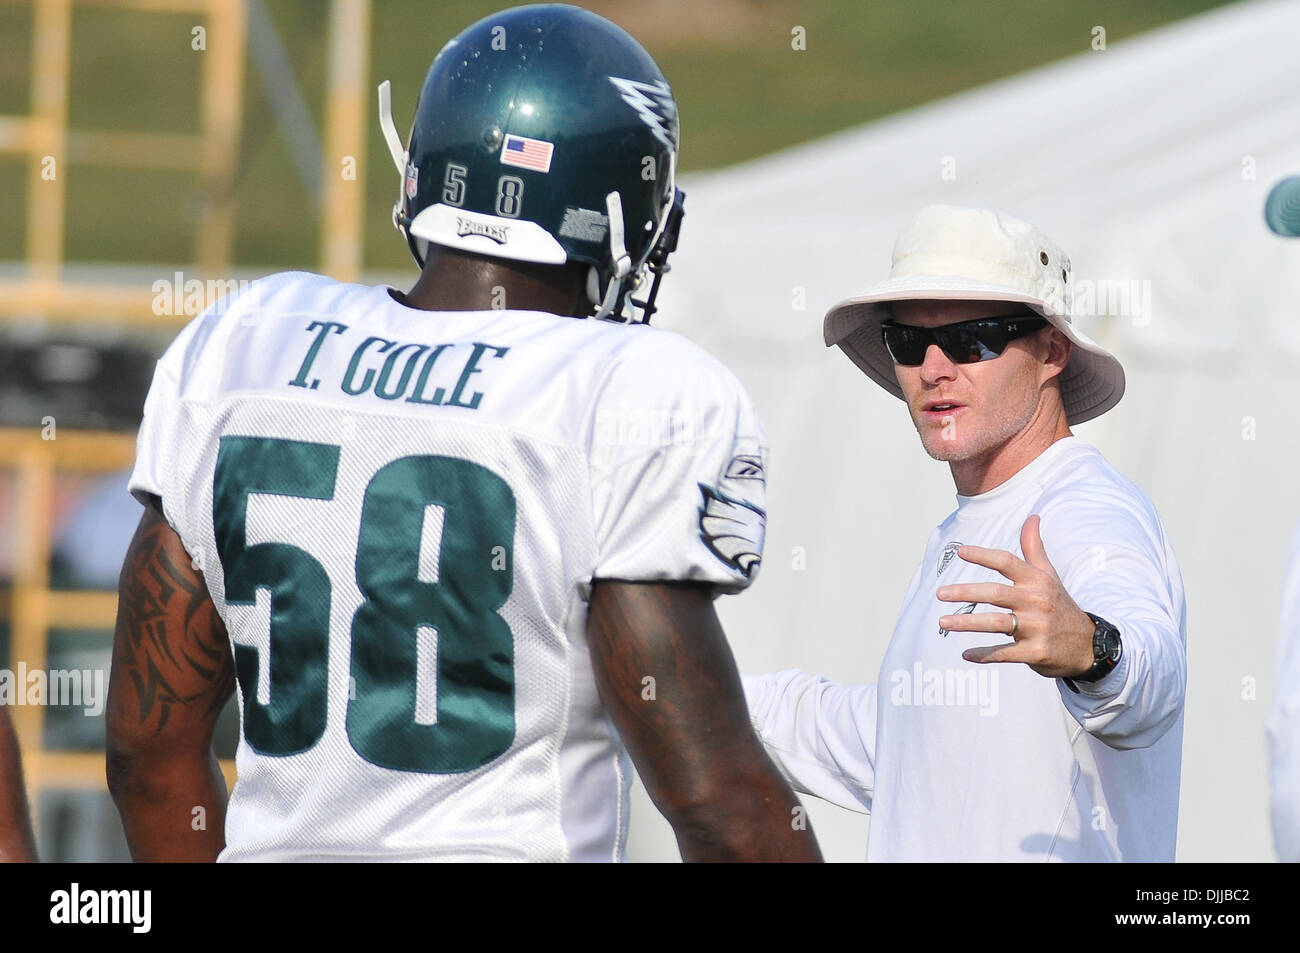 Aug. 10, 2010 - Bethlehem, Pennsylvania, United States of America - 10 August 2010 Philadelphia Eagles defensive lineman Trent Cole #58 is coached up by defensive coordinator Sean McDermott in a practice being held at Lehigh College in Bethlehem, Pennsylvania.Mandatory Credit: Michael McAtee / Southcreek Global (Credit Image: © Southcreek Global/ZUMApress.com) Stock Photo